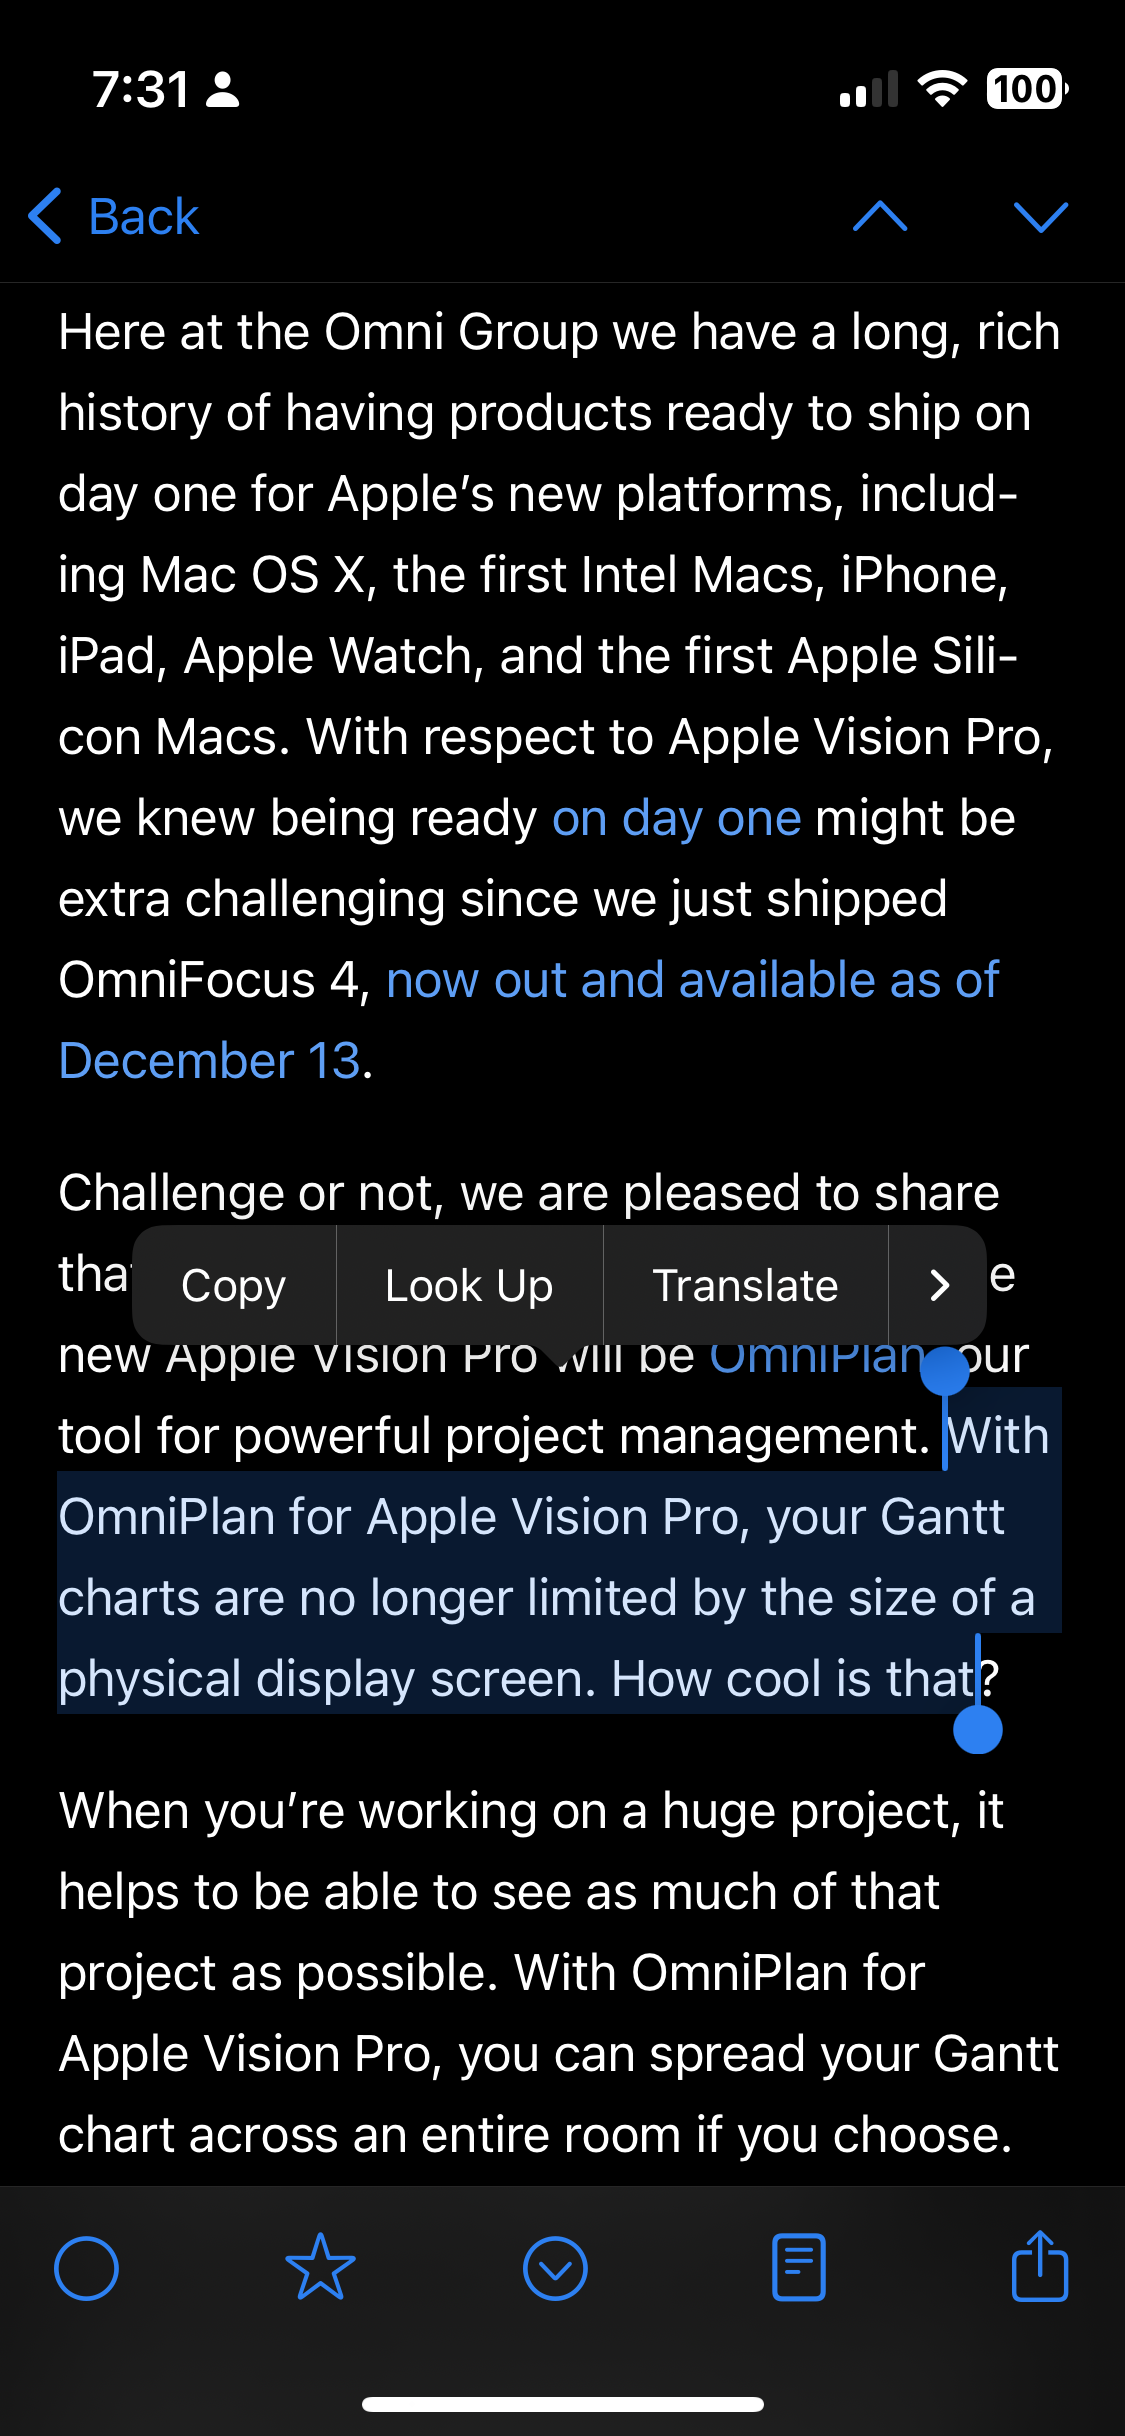 The following quote, highlighted: "With OmniPlan for Apple Vision Pro, your Gantt charts are no longer limited by the size of a physical display screen. How cool is that?"